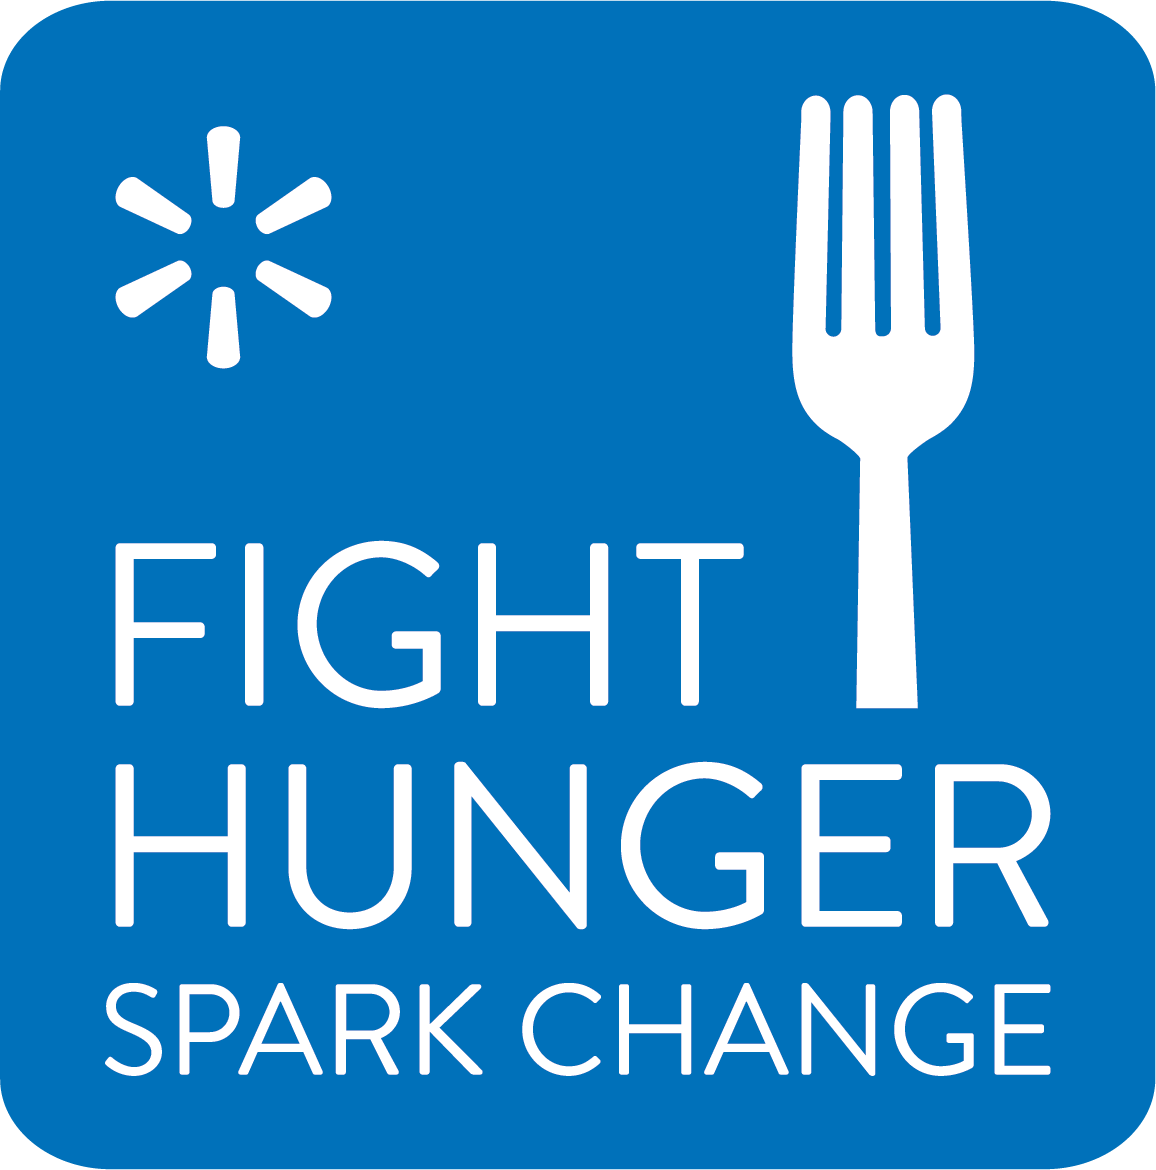 Walmart and Sam’s Club Fight Hunger. Spark Change. campaign returns to the Ozarks to help people facing hunger